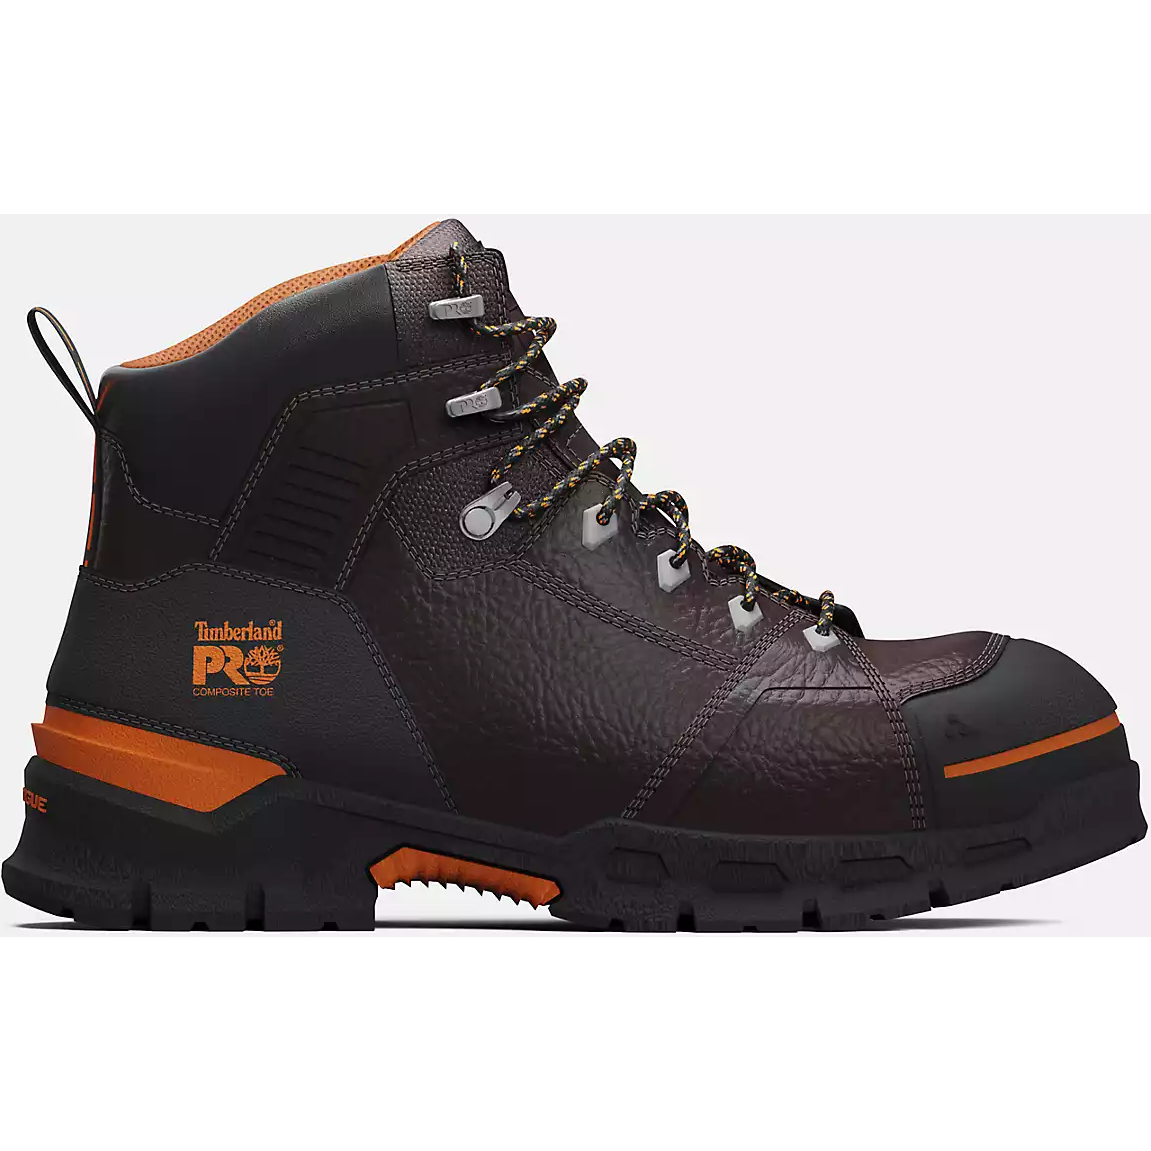 Timberland Pro Men's Endurance EV Comp Toe WP Work Boot -Brown- TB0A5YZY214  - Overlook Boots